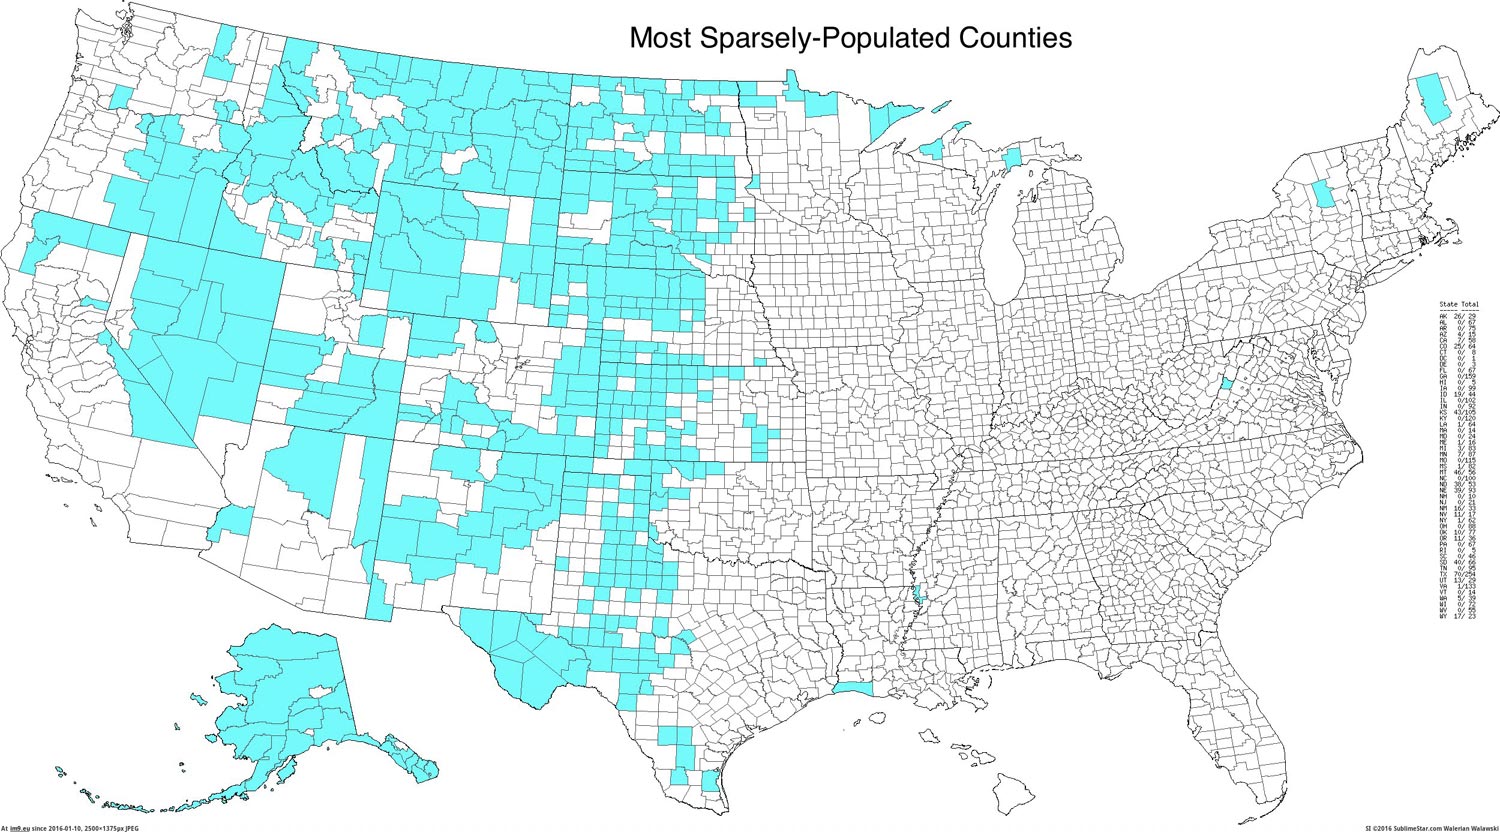 United-States-Map-of-the-Most-Sparsely-Populated-Counites